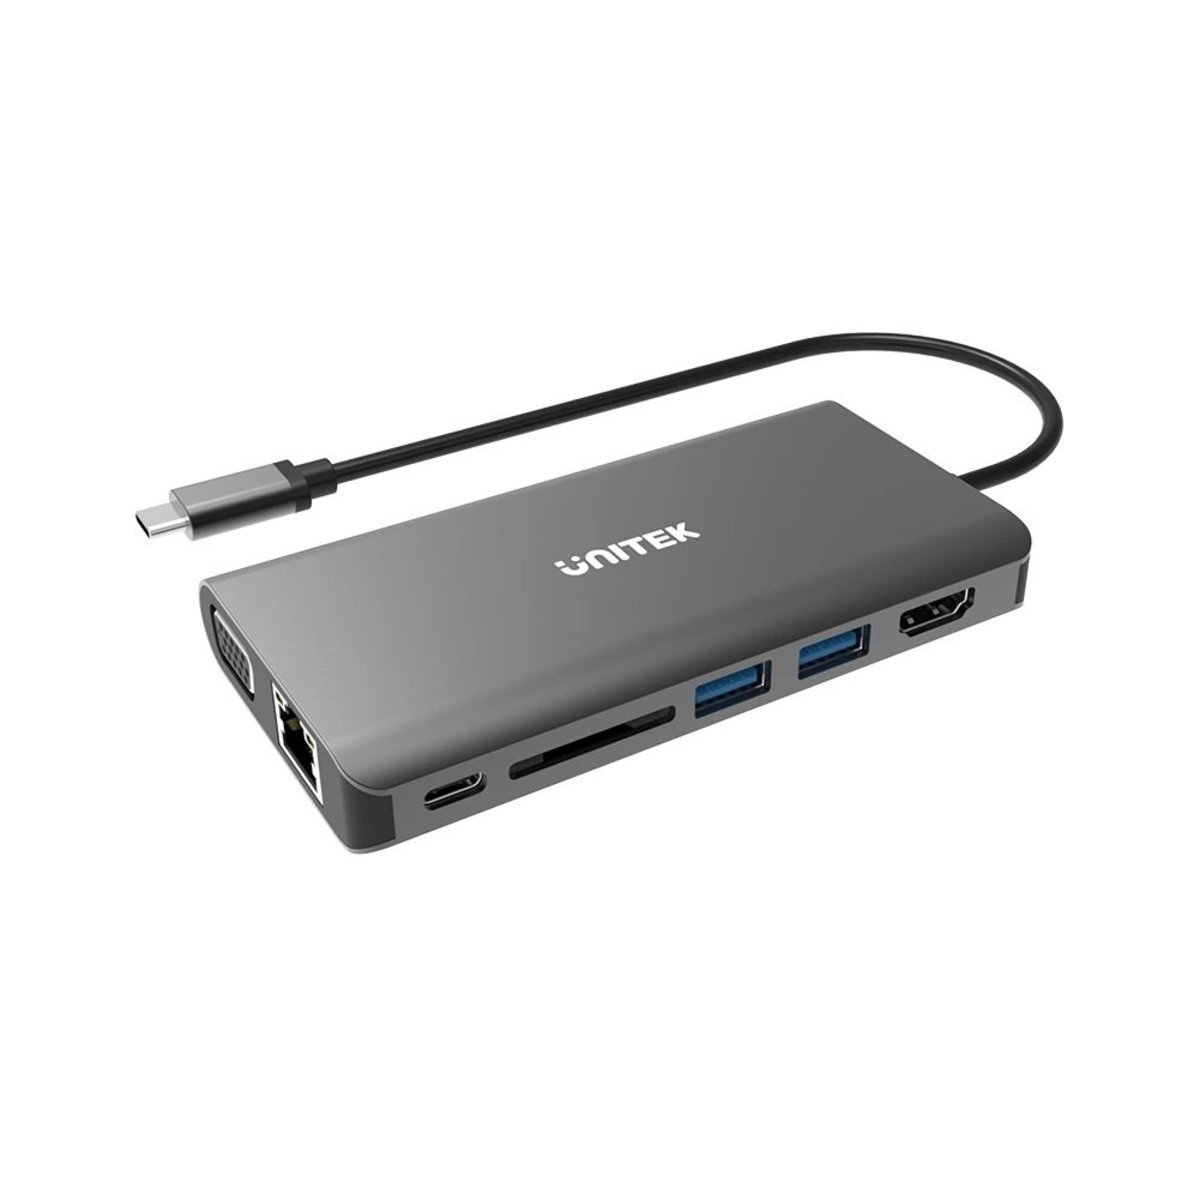 UHUB 08+ 8 IN 1 USB3.1 TYPE-C HUB WITH POWER DELIVERY 100W ( D1019A )